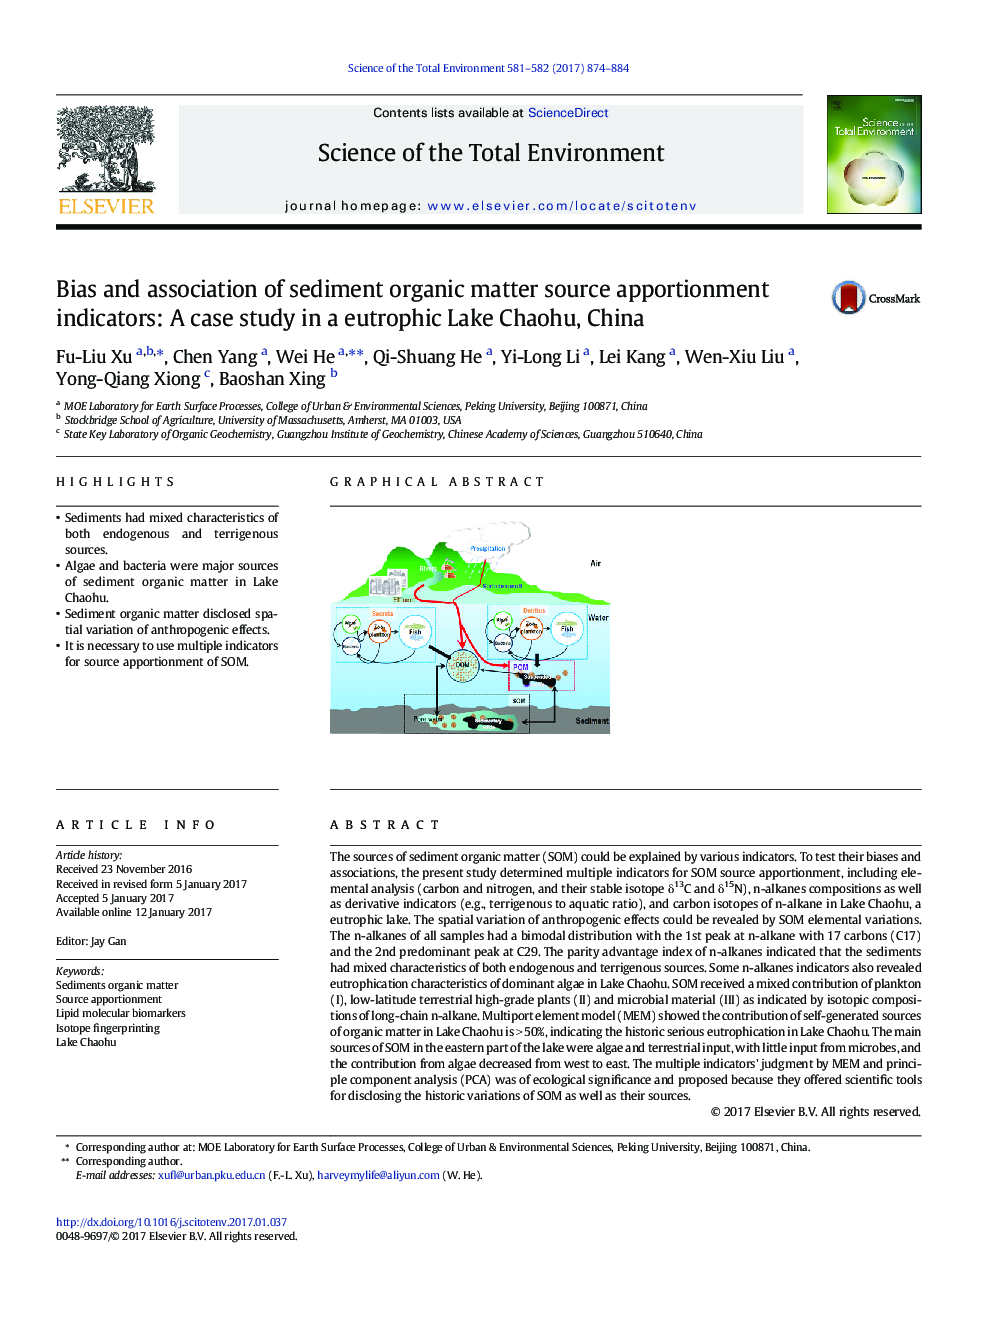 Bias and association of sediment organic matter source apportionment indicators: A case study in a eutrophic Lake Chaohu, China